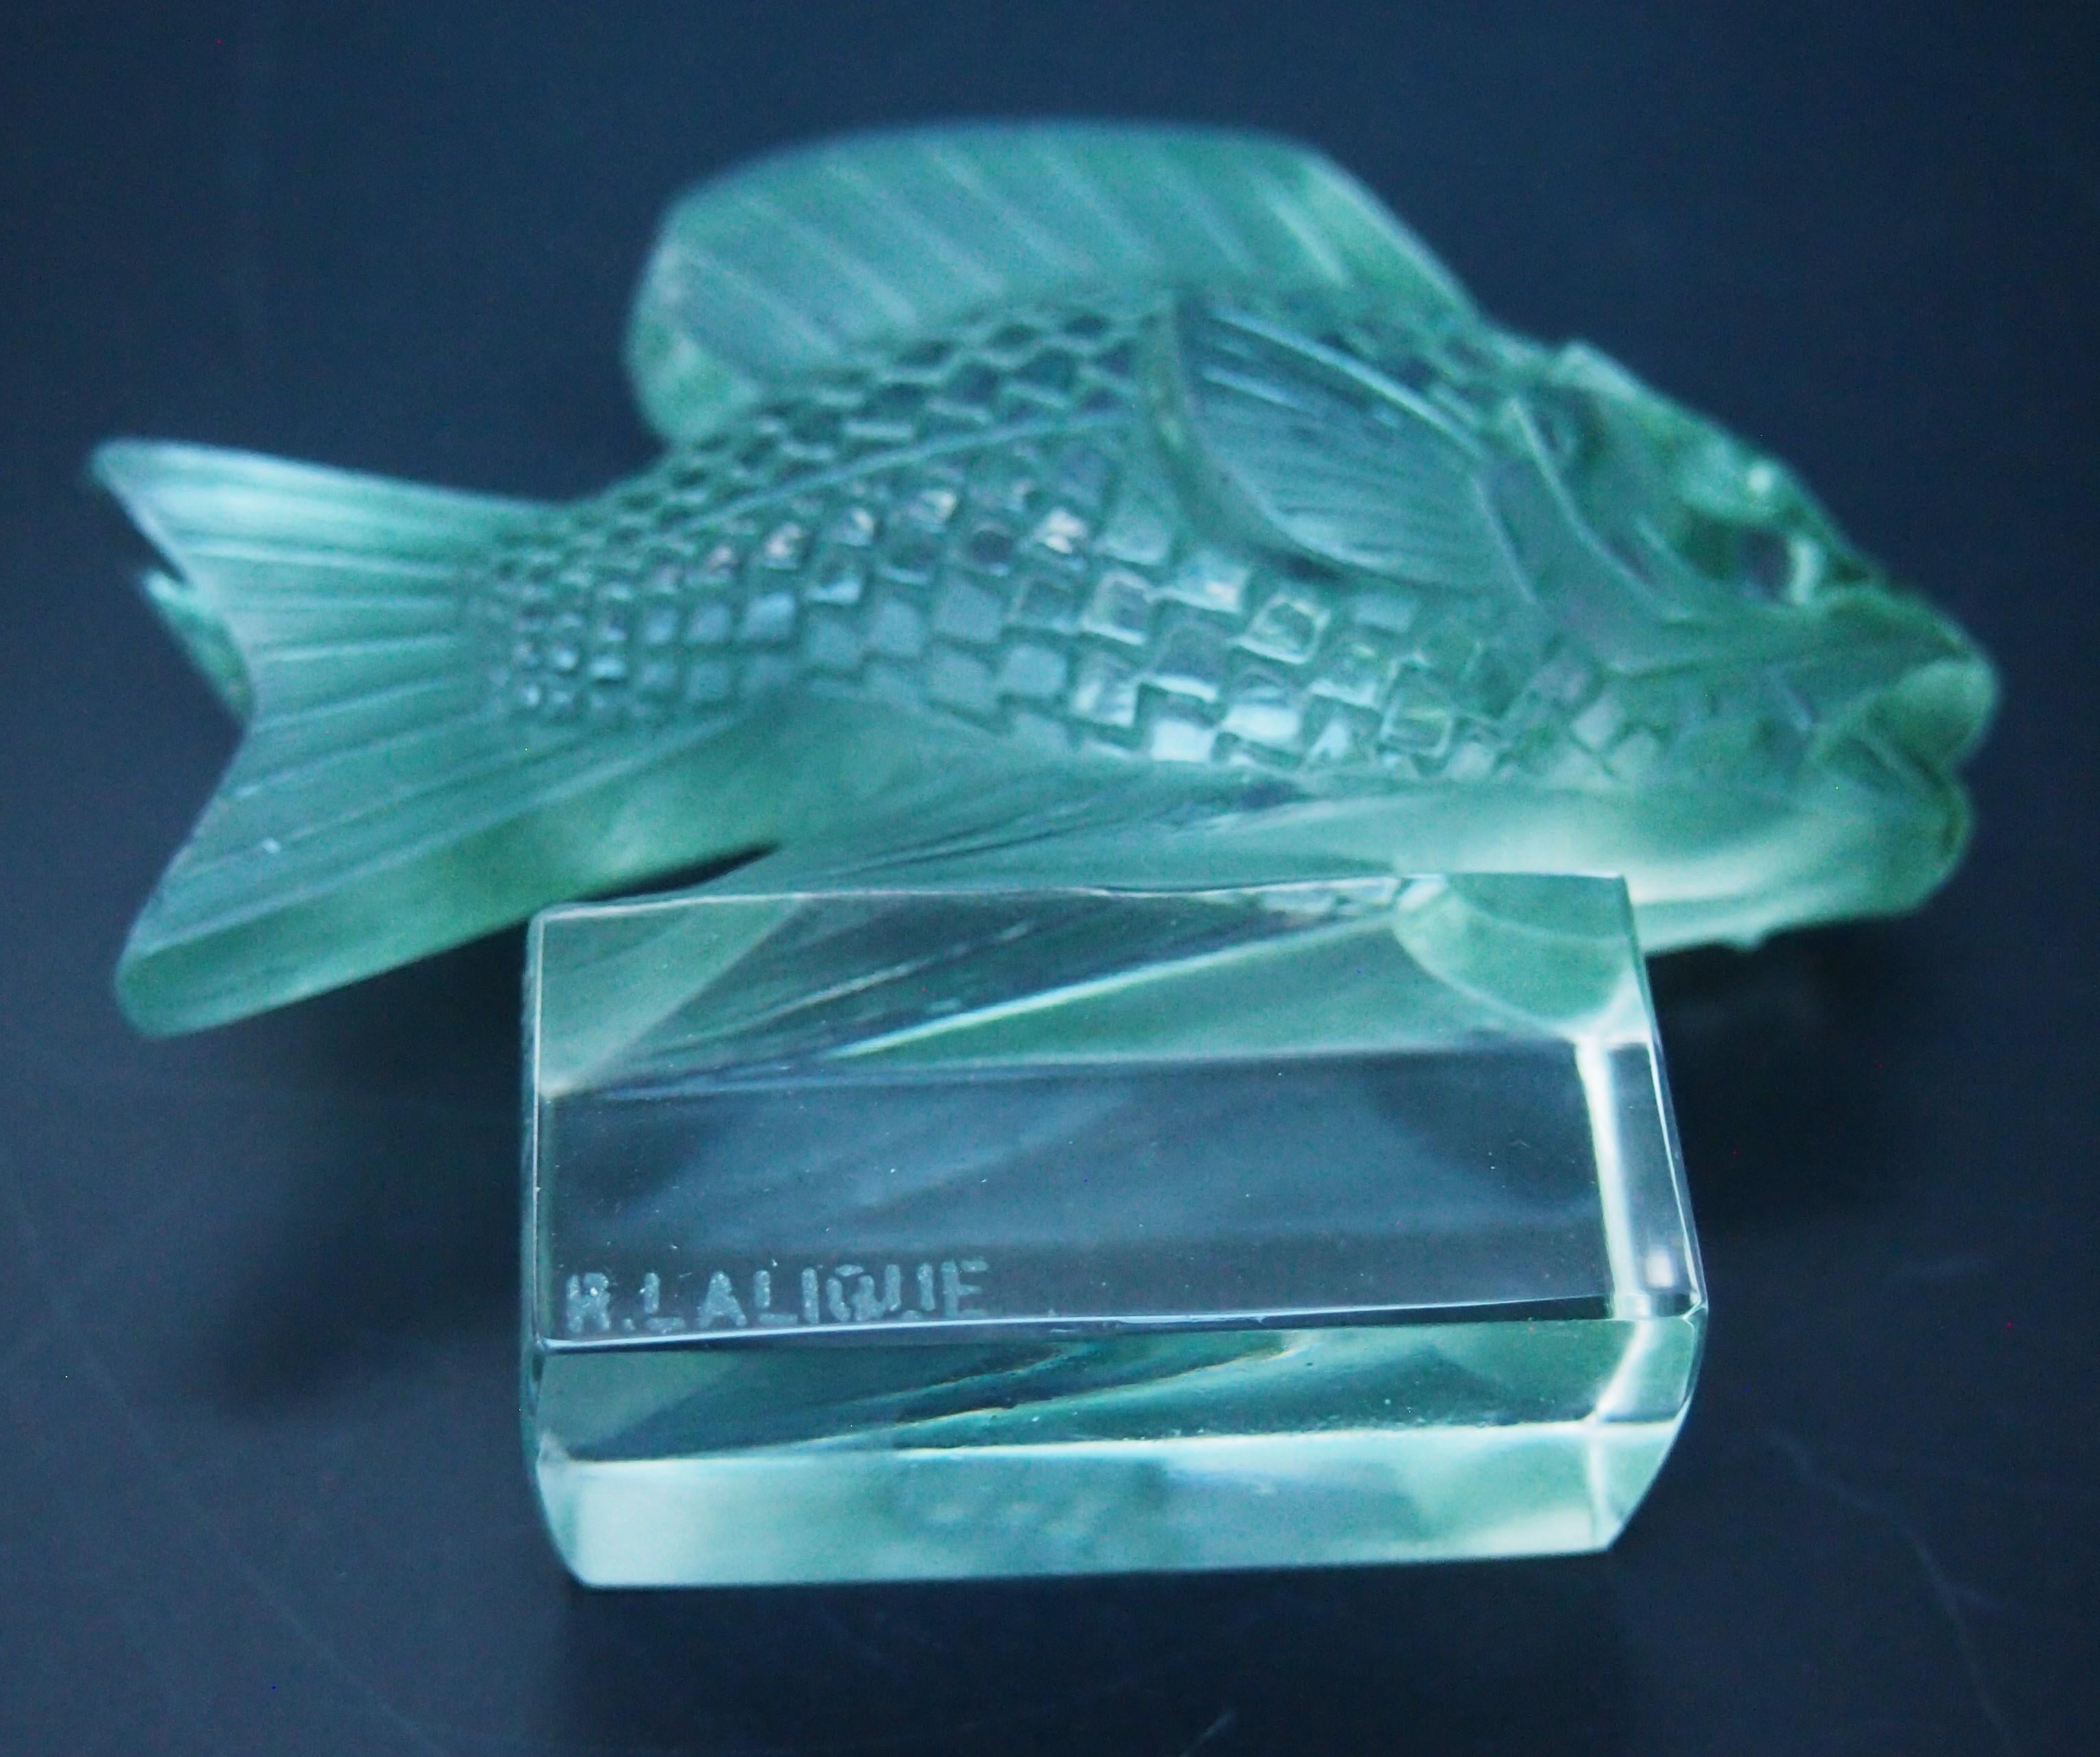 Rene Lalique 'Barbillon' paperweight signed c1930 -original green staining In Good Condition For Sale In Worcester Park, GB